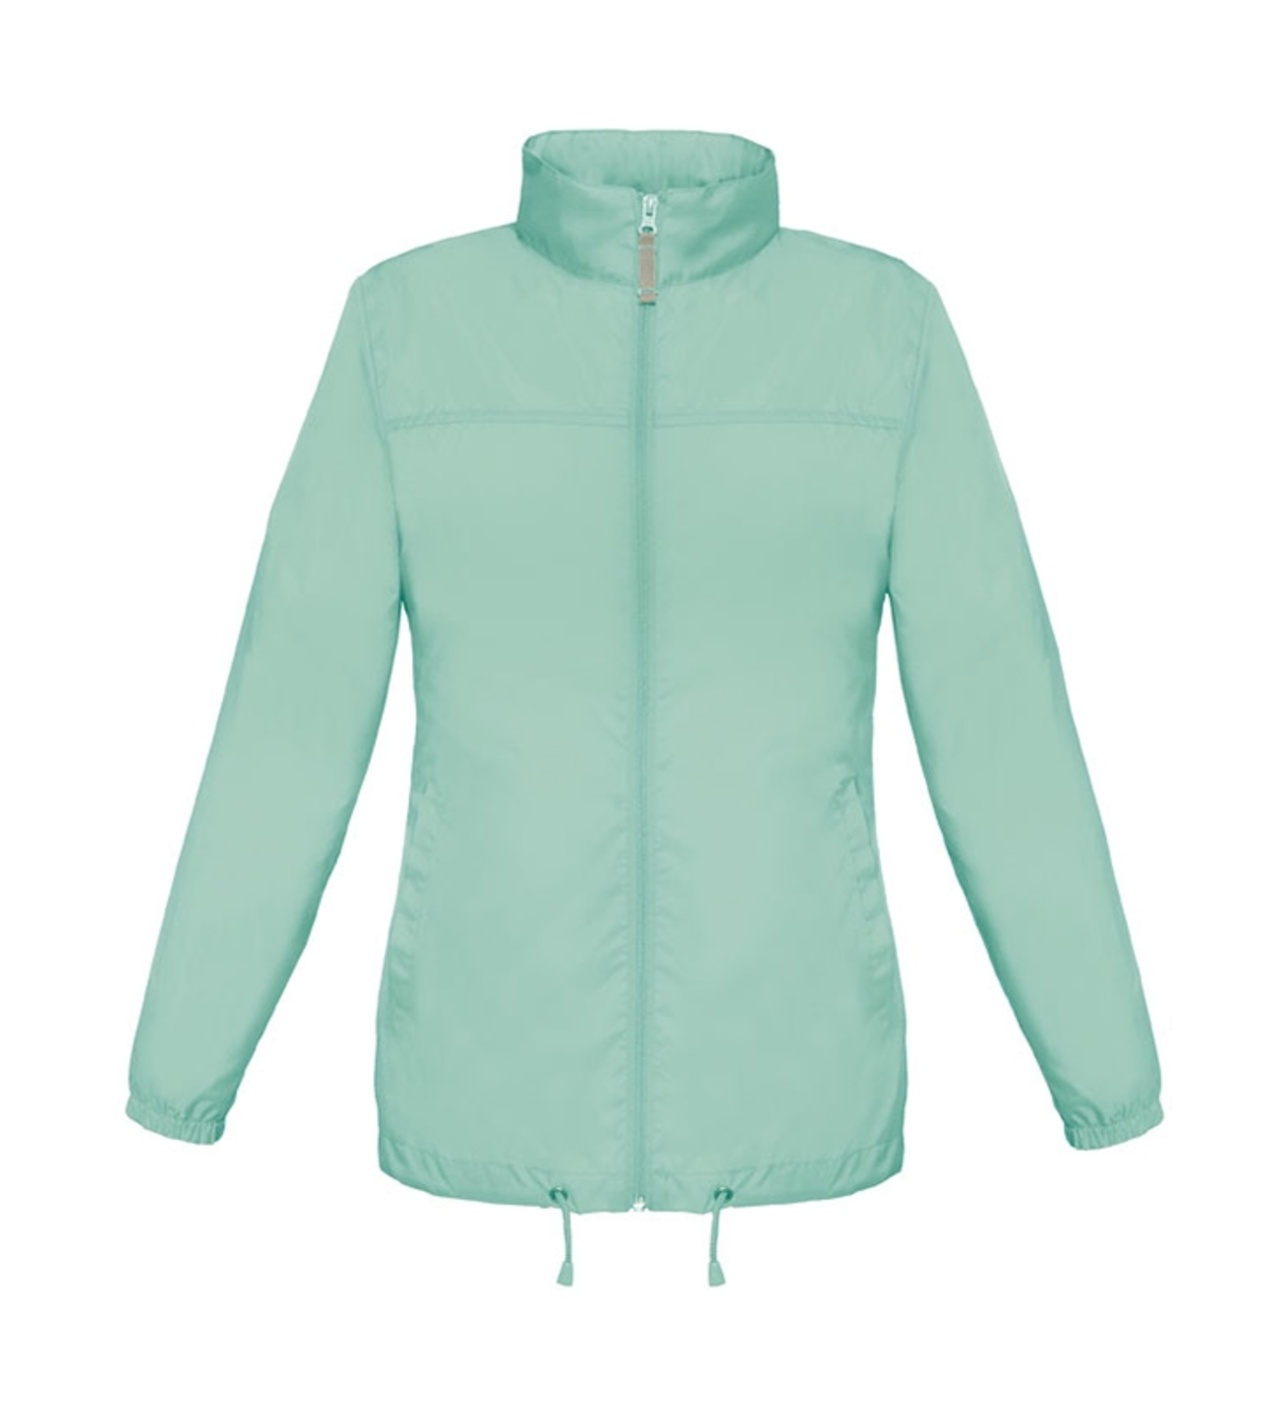 B and C Collection Sirocco Woman - PIXEL TURQUOISE - M